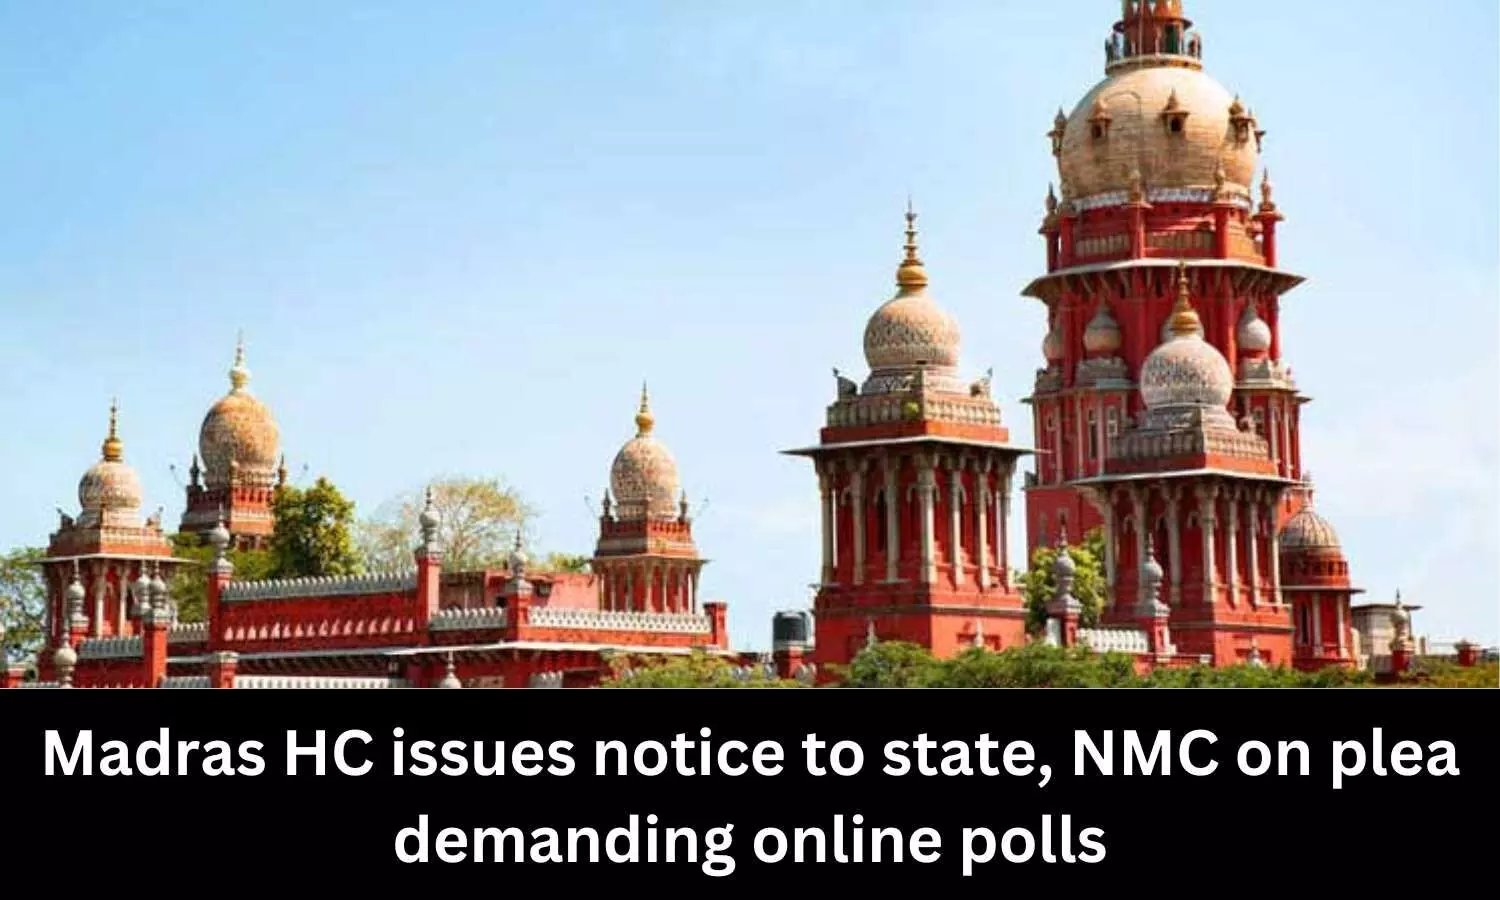 Tamil Nadu medical council elections: Madras HC issues notice to state, NMC on plea demanding online polls